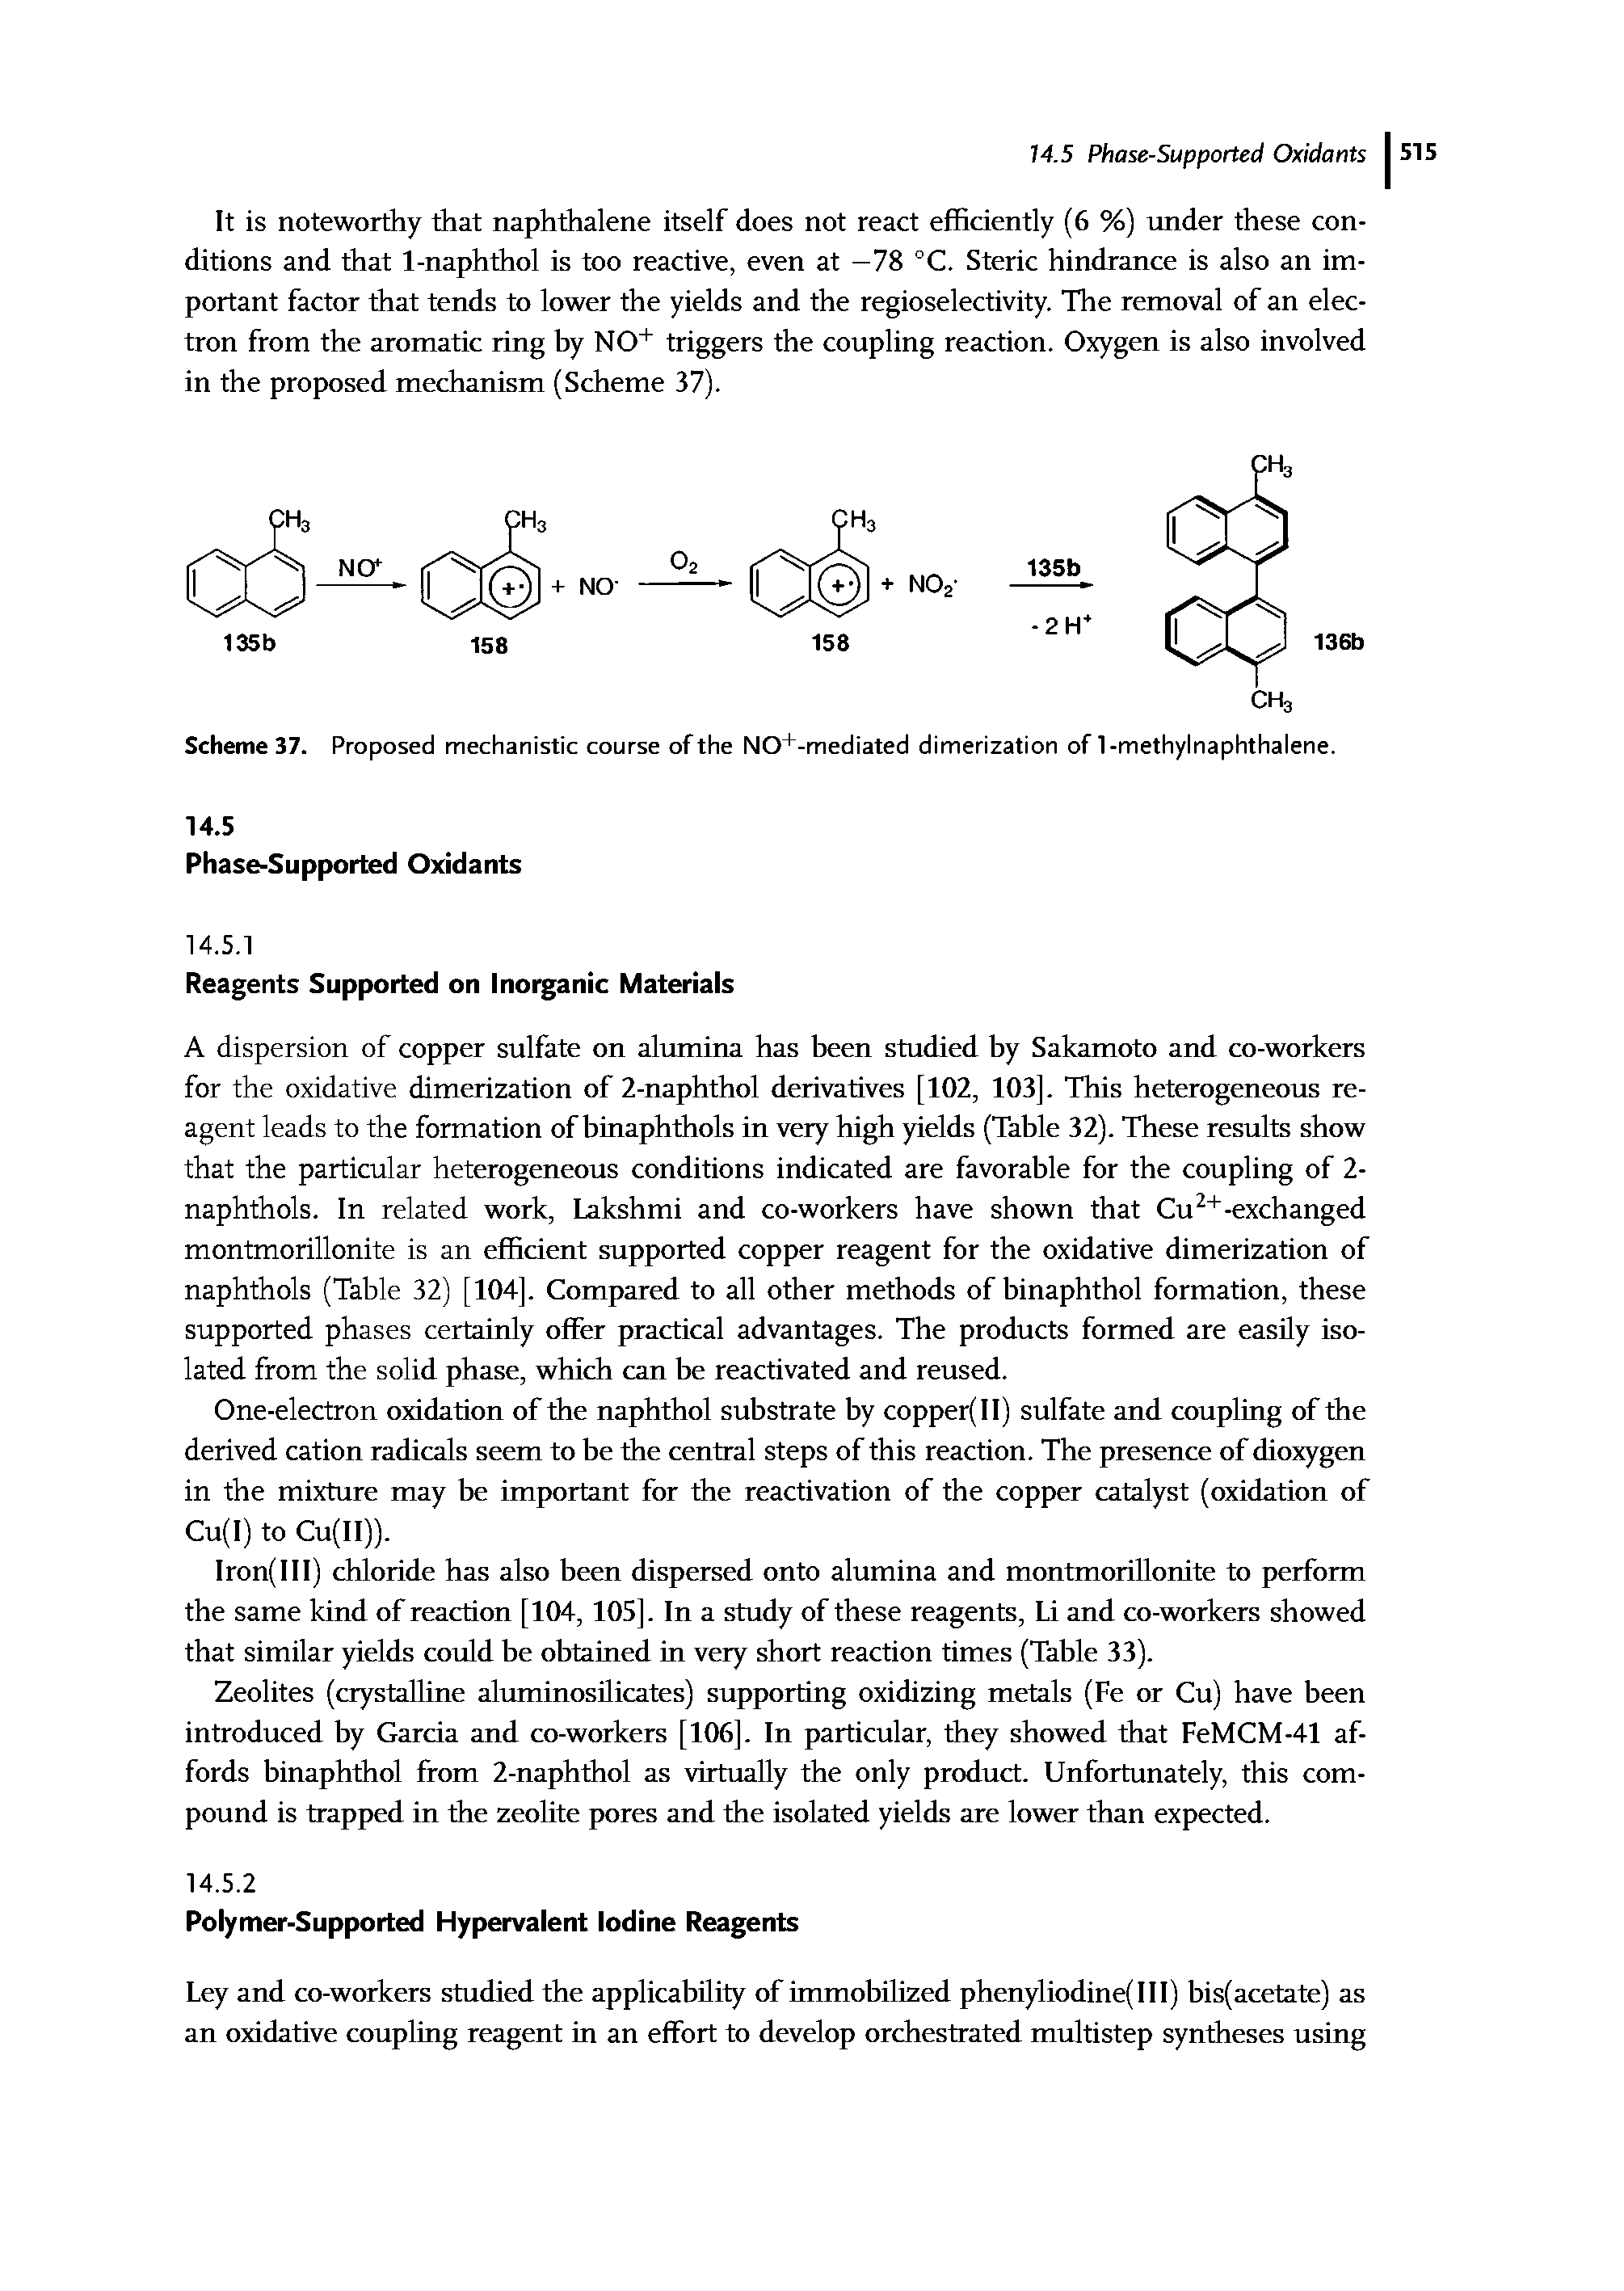 Scheme 37. Proposed mechanistic course of the NO+-mediated dimerization of 1-methylnaphthalene. 14.5...